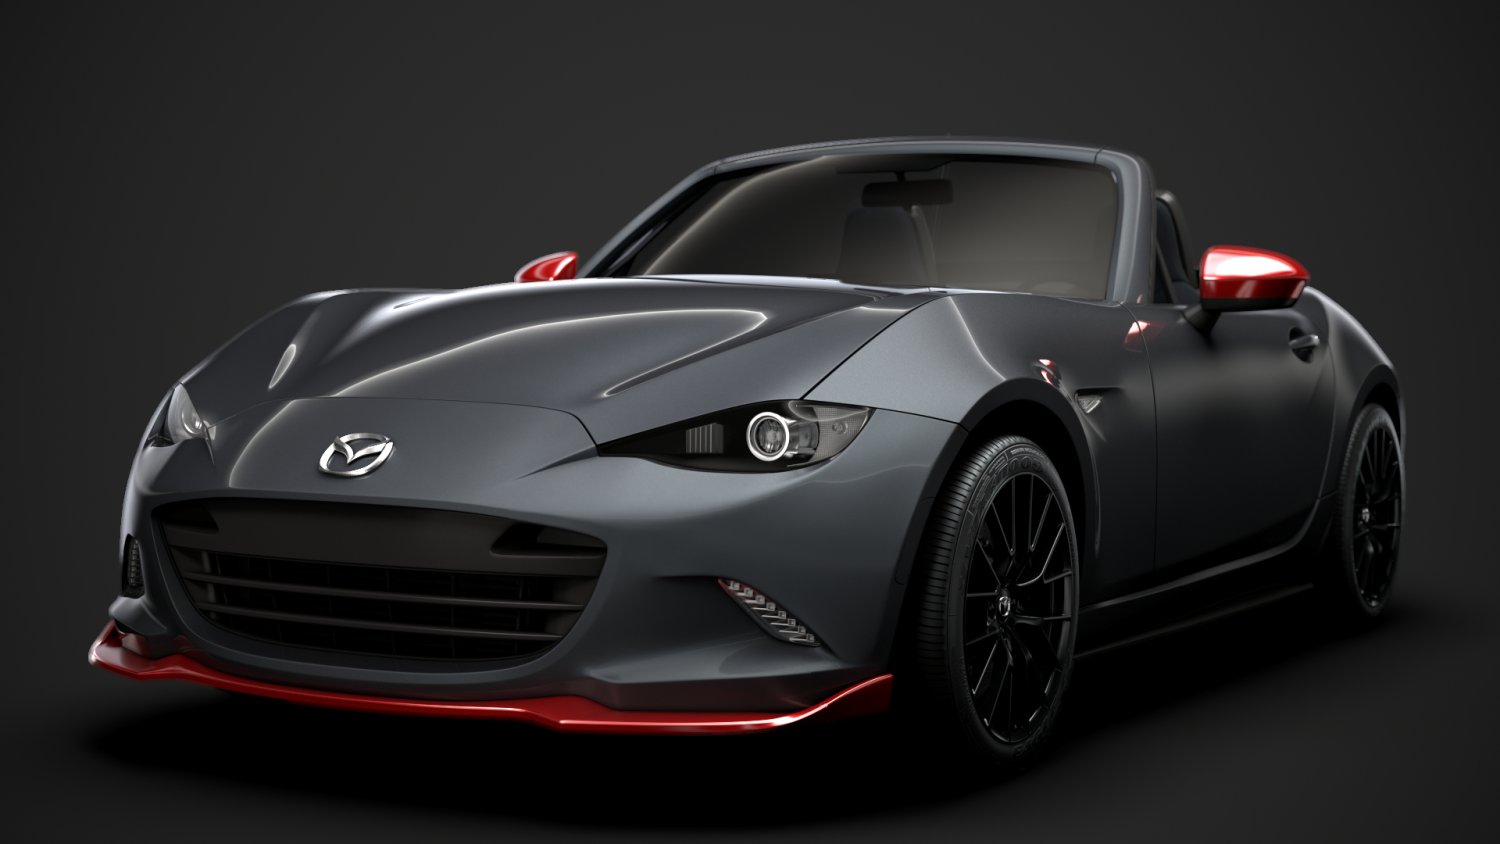 Wallpaper The Crew Mazda 2, MX5 Red vdeo game Cars